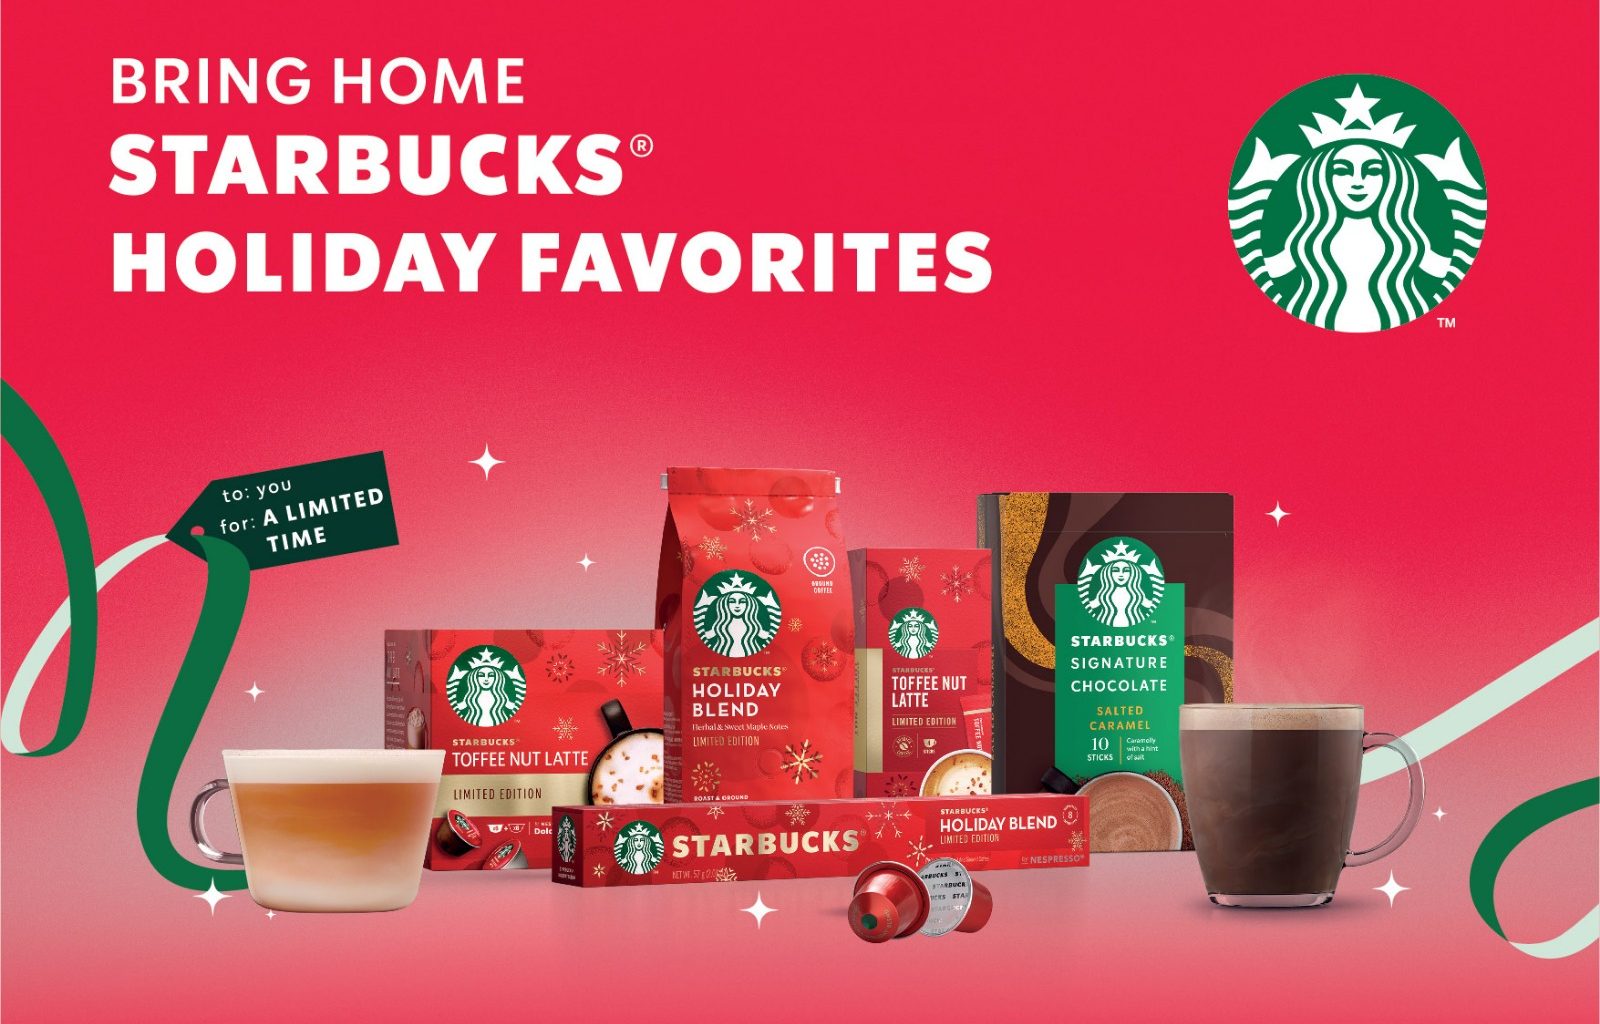 Nestle and Starbucks bring back Holiday Favourites and unveils new Signature Chocolate Salted Caramel - Alvinology